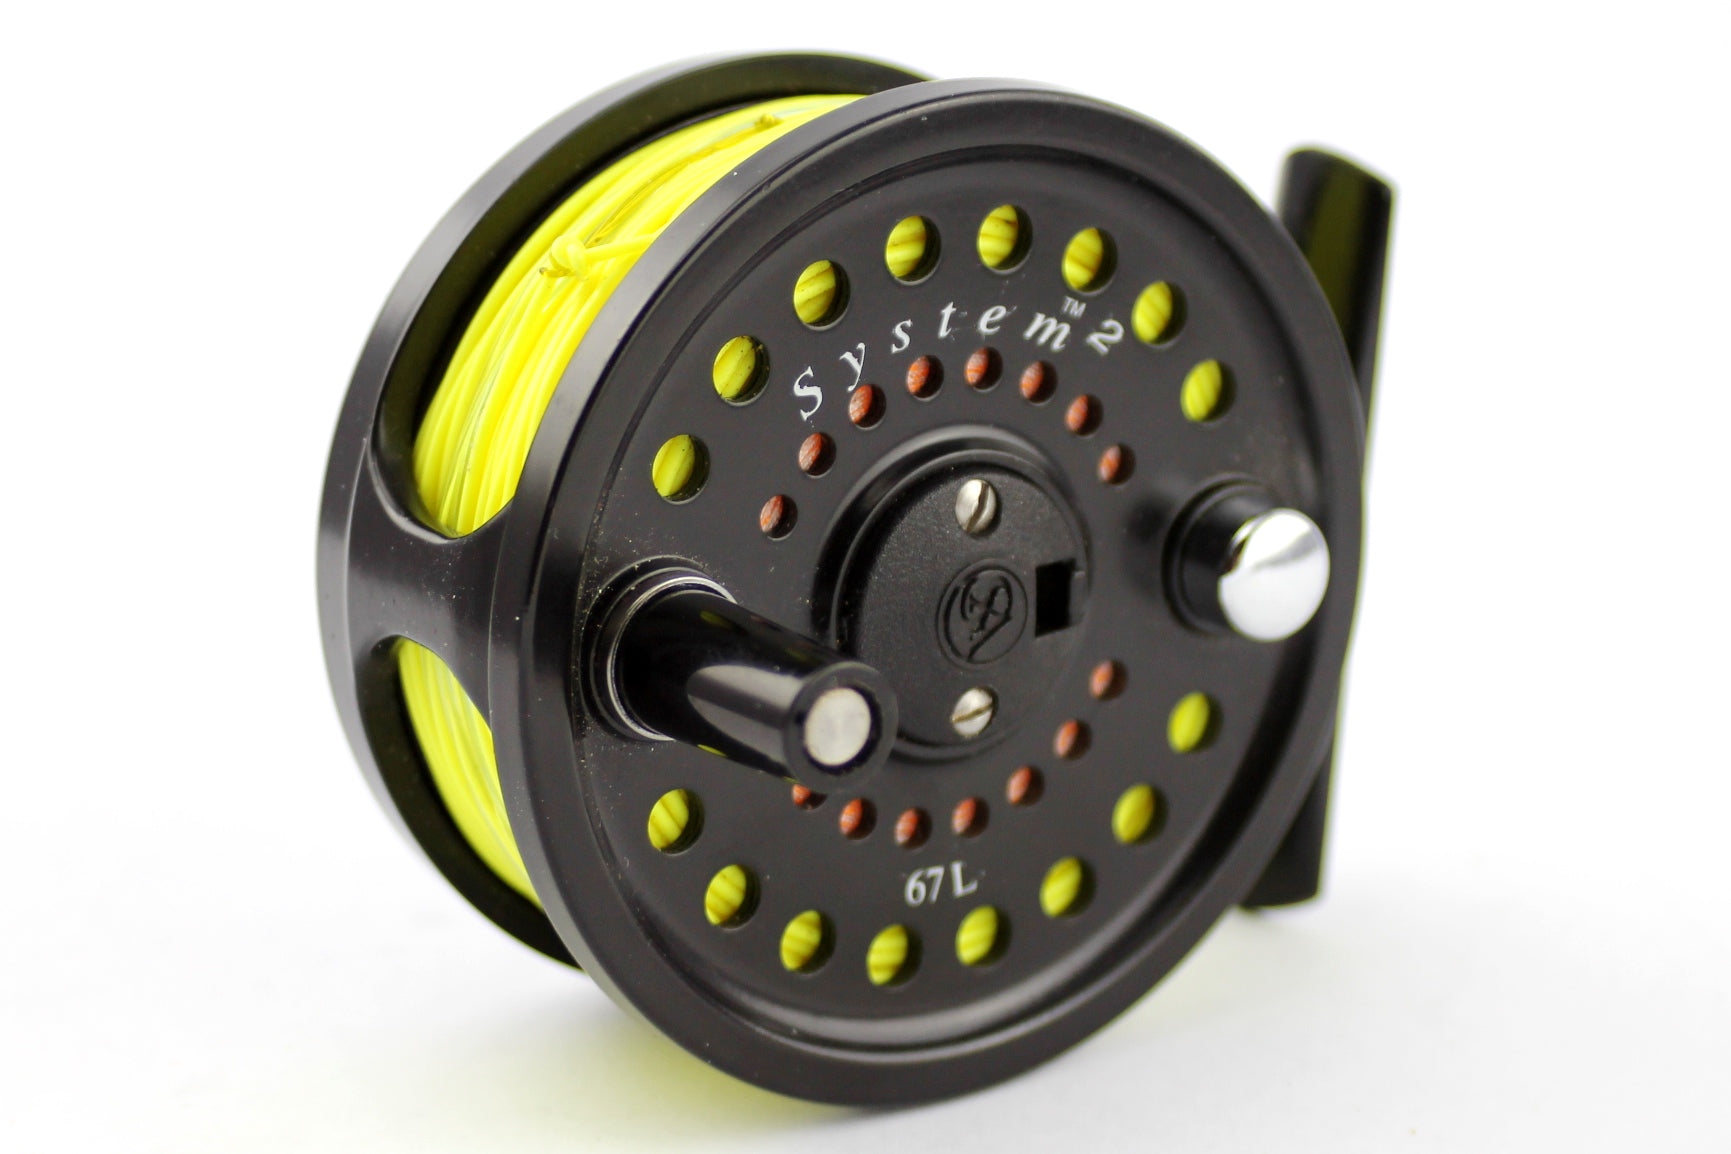 3 System 2 Reel, 6/7 Line Weight, Left Hand Wind